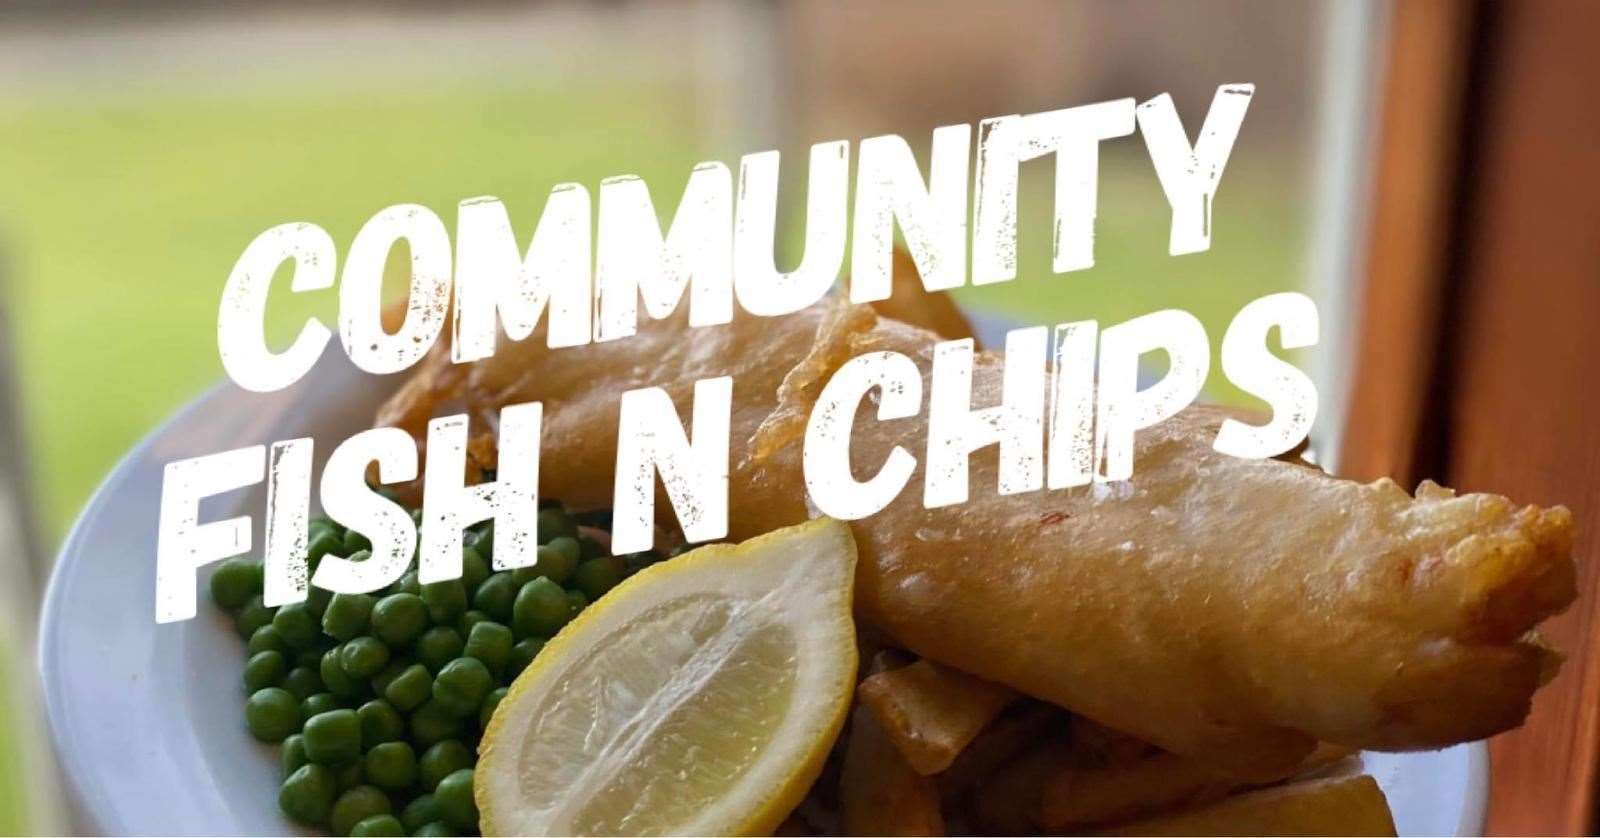 The Farr Eats initiative holds community fish n chip lunches in north coast halls.